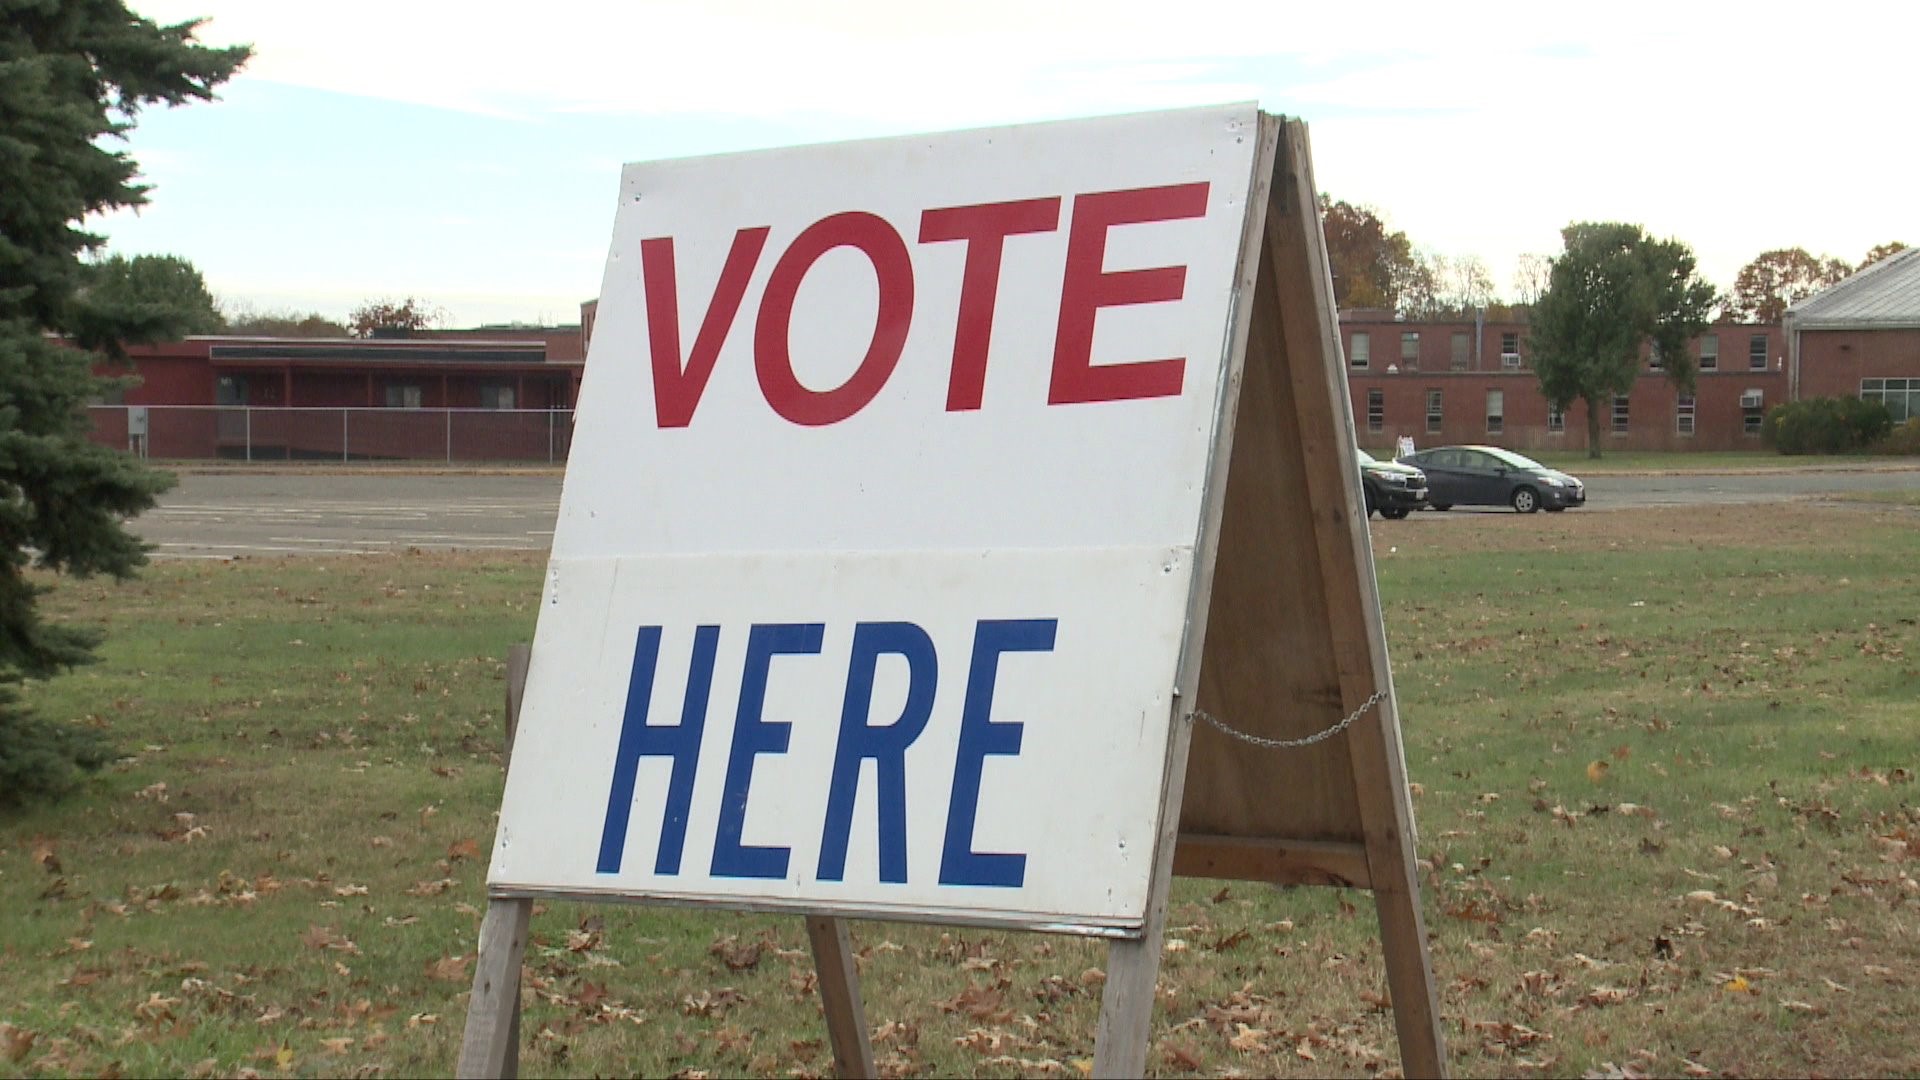 Both sides in play ahead of Election Day in the 5th Congressional District